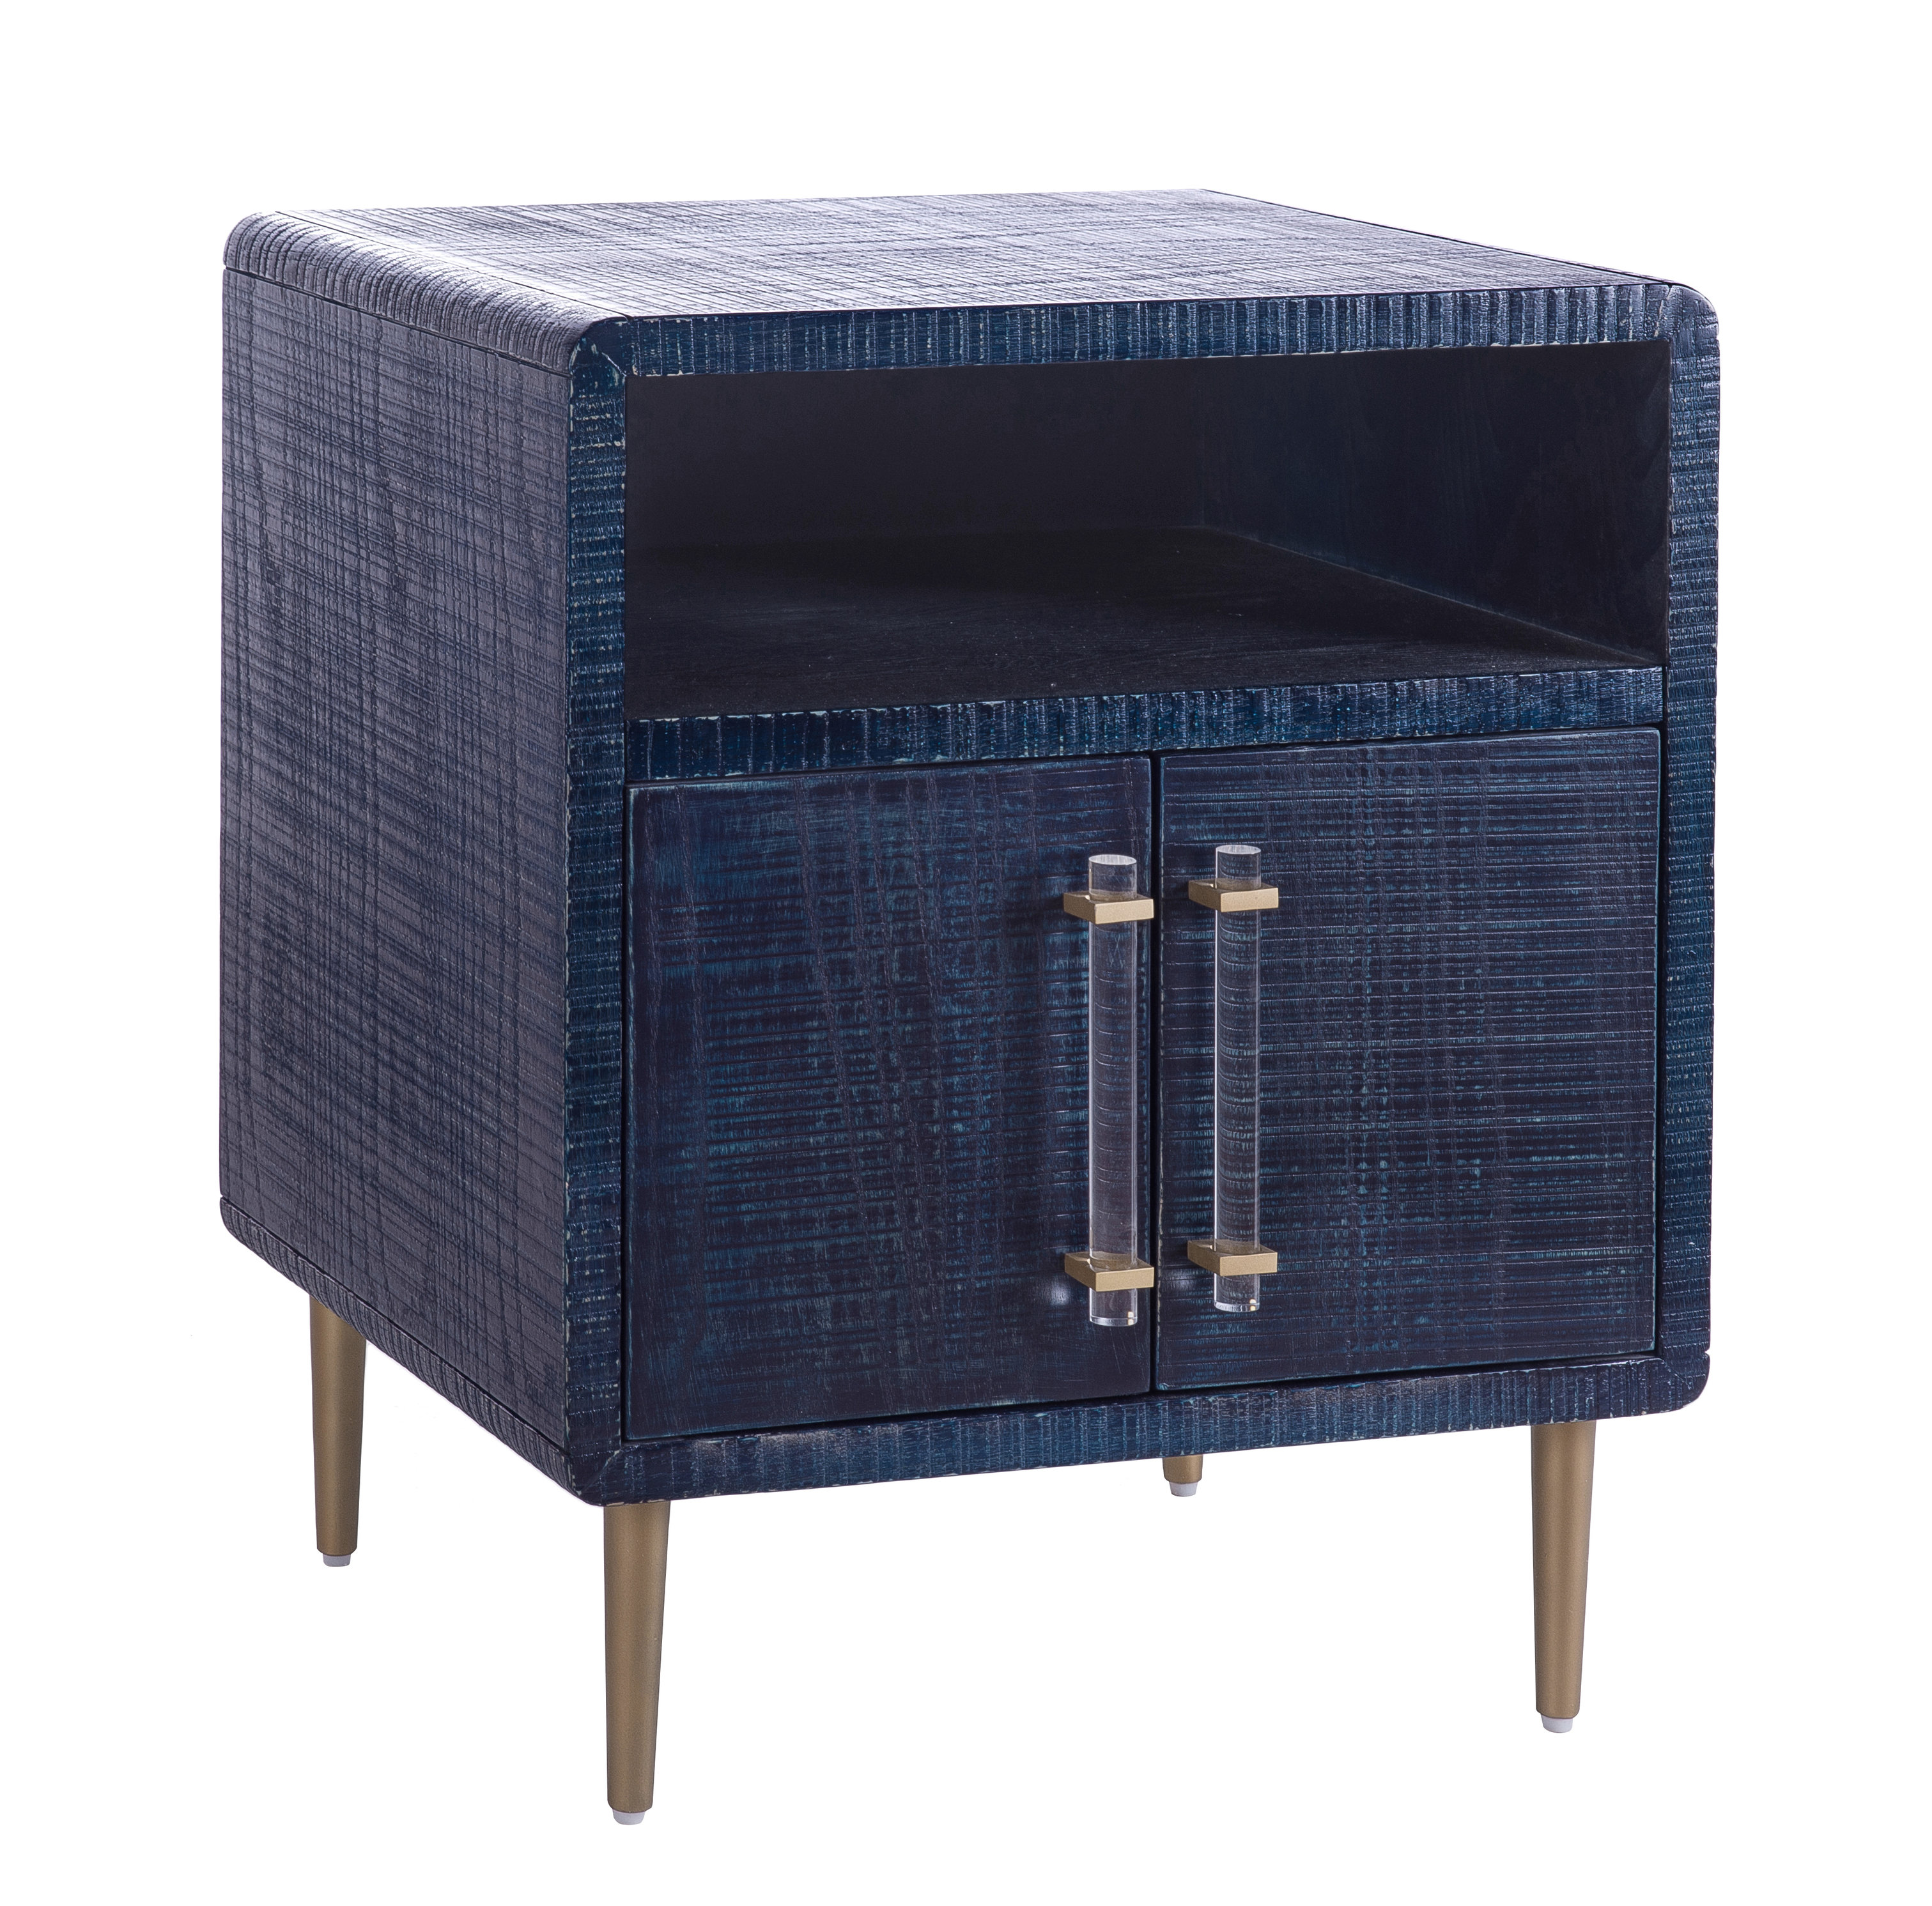 TOV Furniture Marco Textured Indigo Finish Side Table with Brass Legs - image 4 of 9